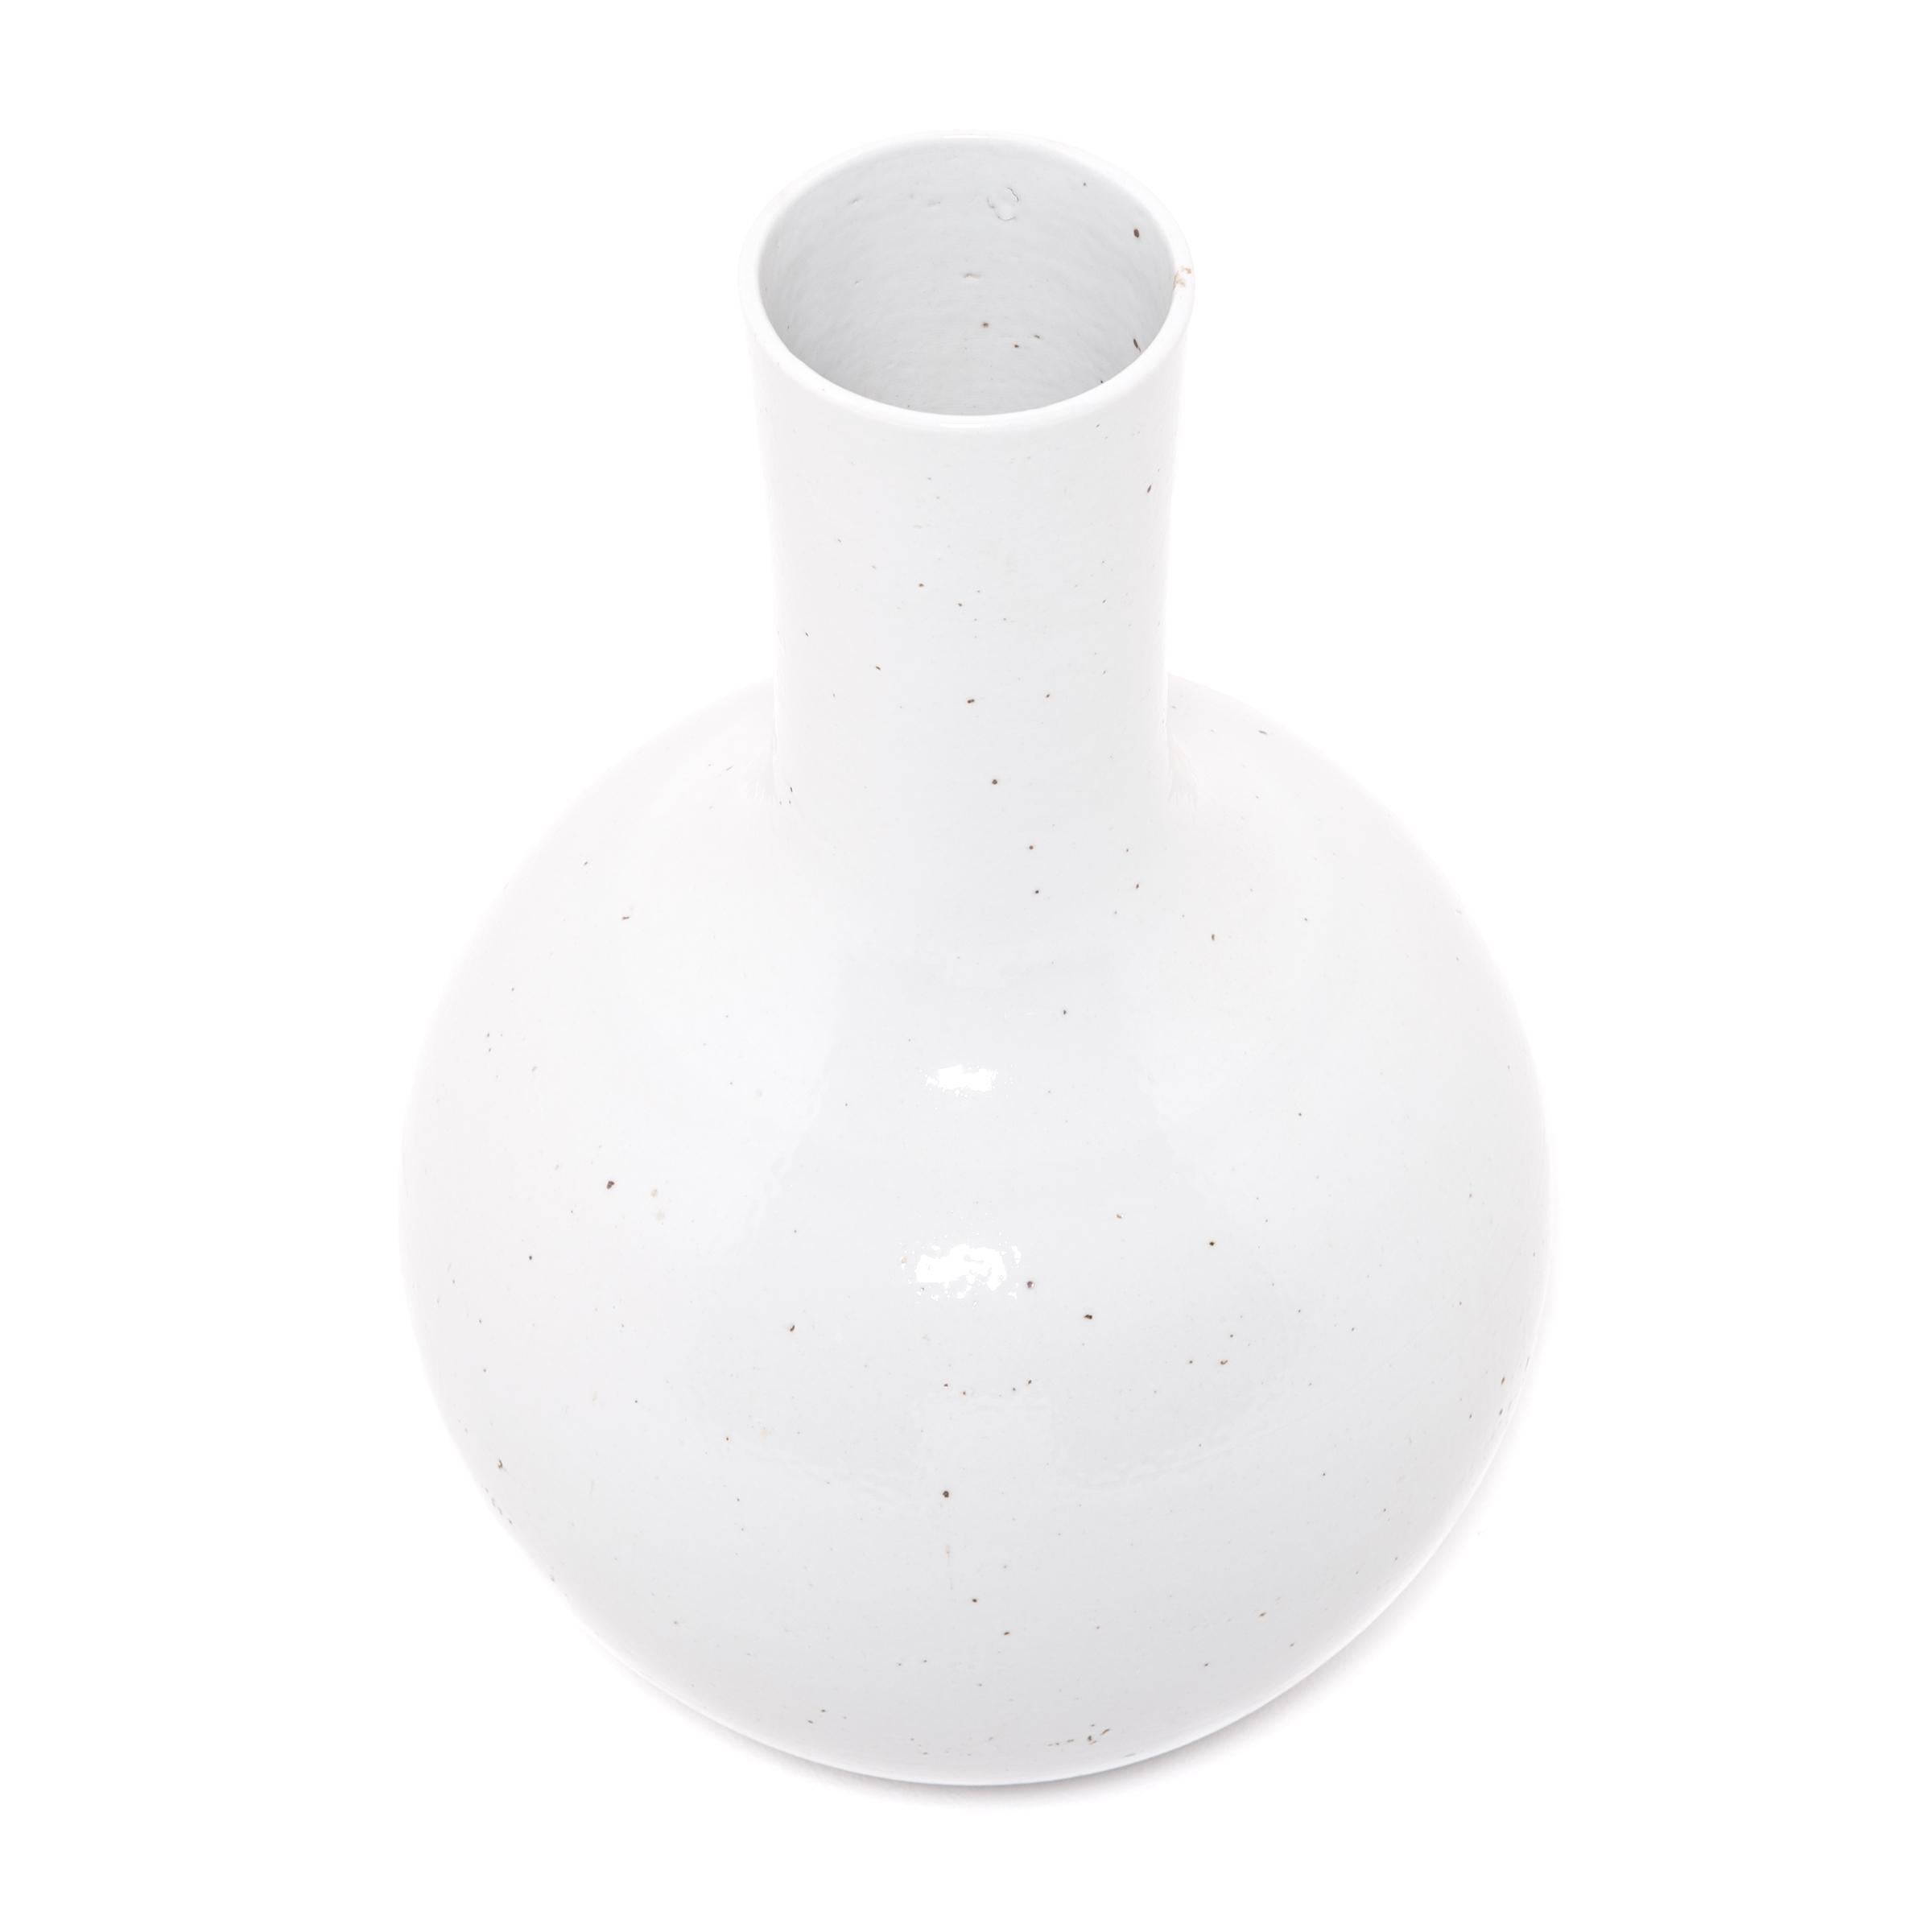 Drawing on a long Chinese tradition of monochrome ceramics, this austere long-necked vase is glazed in serene, cloud-inspired white. Crafted in in Zhejiang province, local ceramists reinterpreted this very traditional shape with clean lines and an